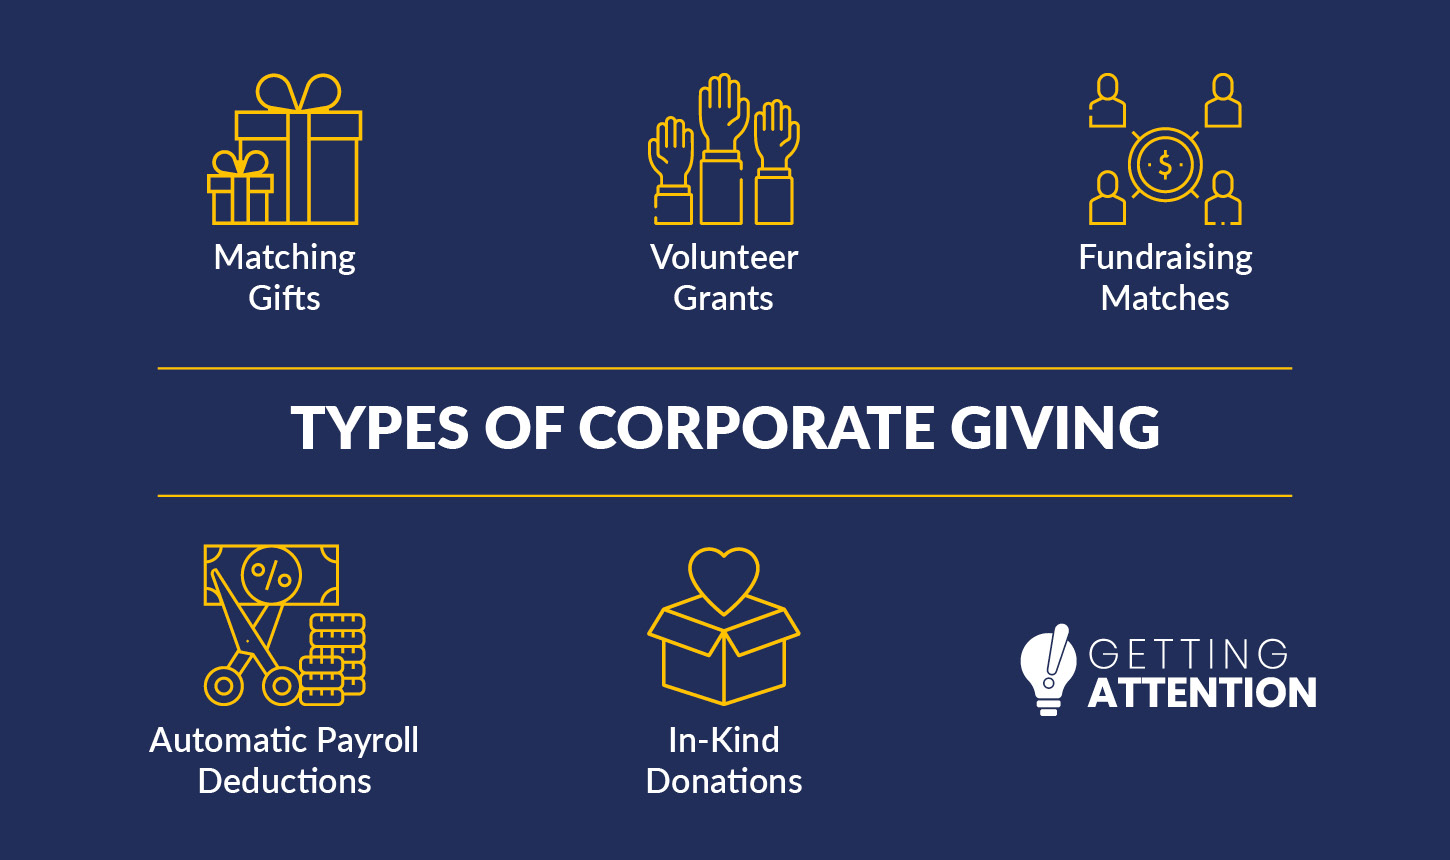 There are several different types of corporate giving in addition to matching gifts.